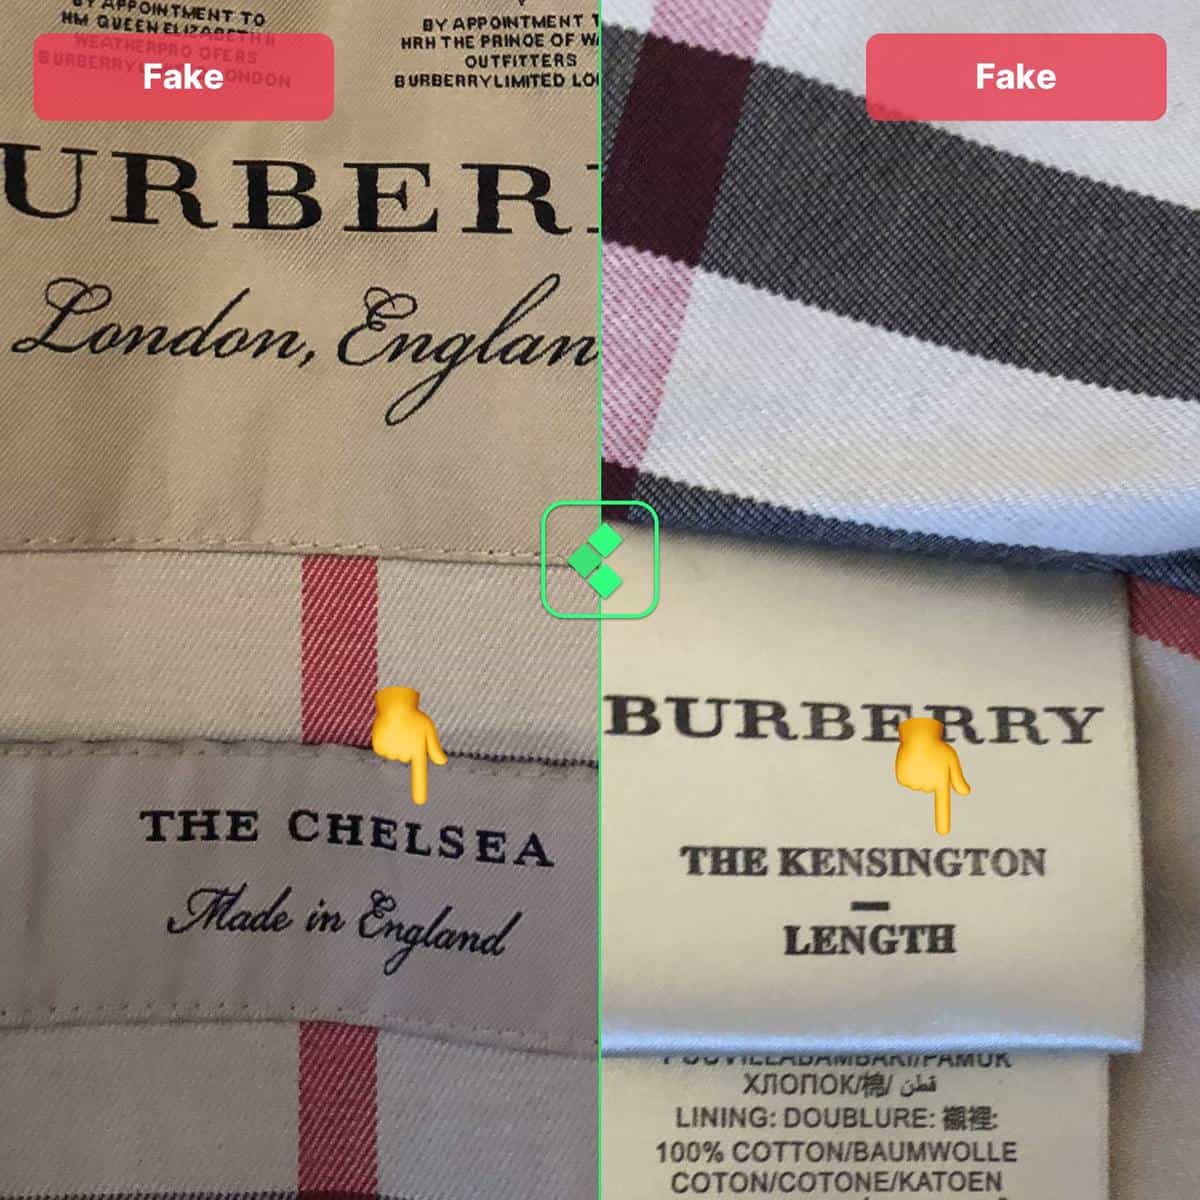 How To Spot A Fake Burberry Coat - Treatmentstop21